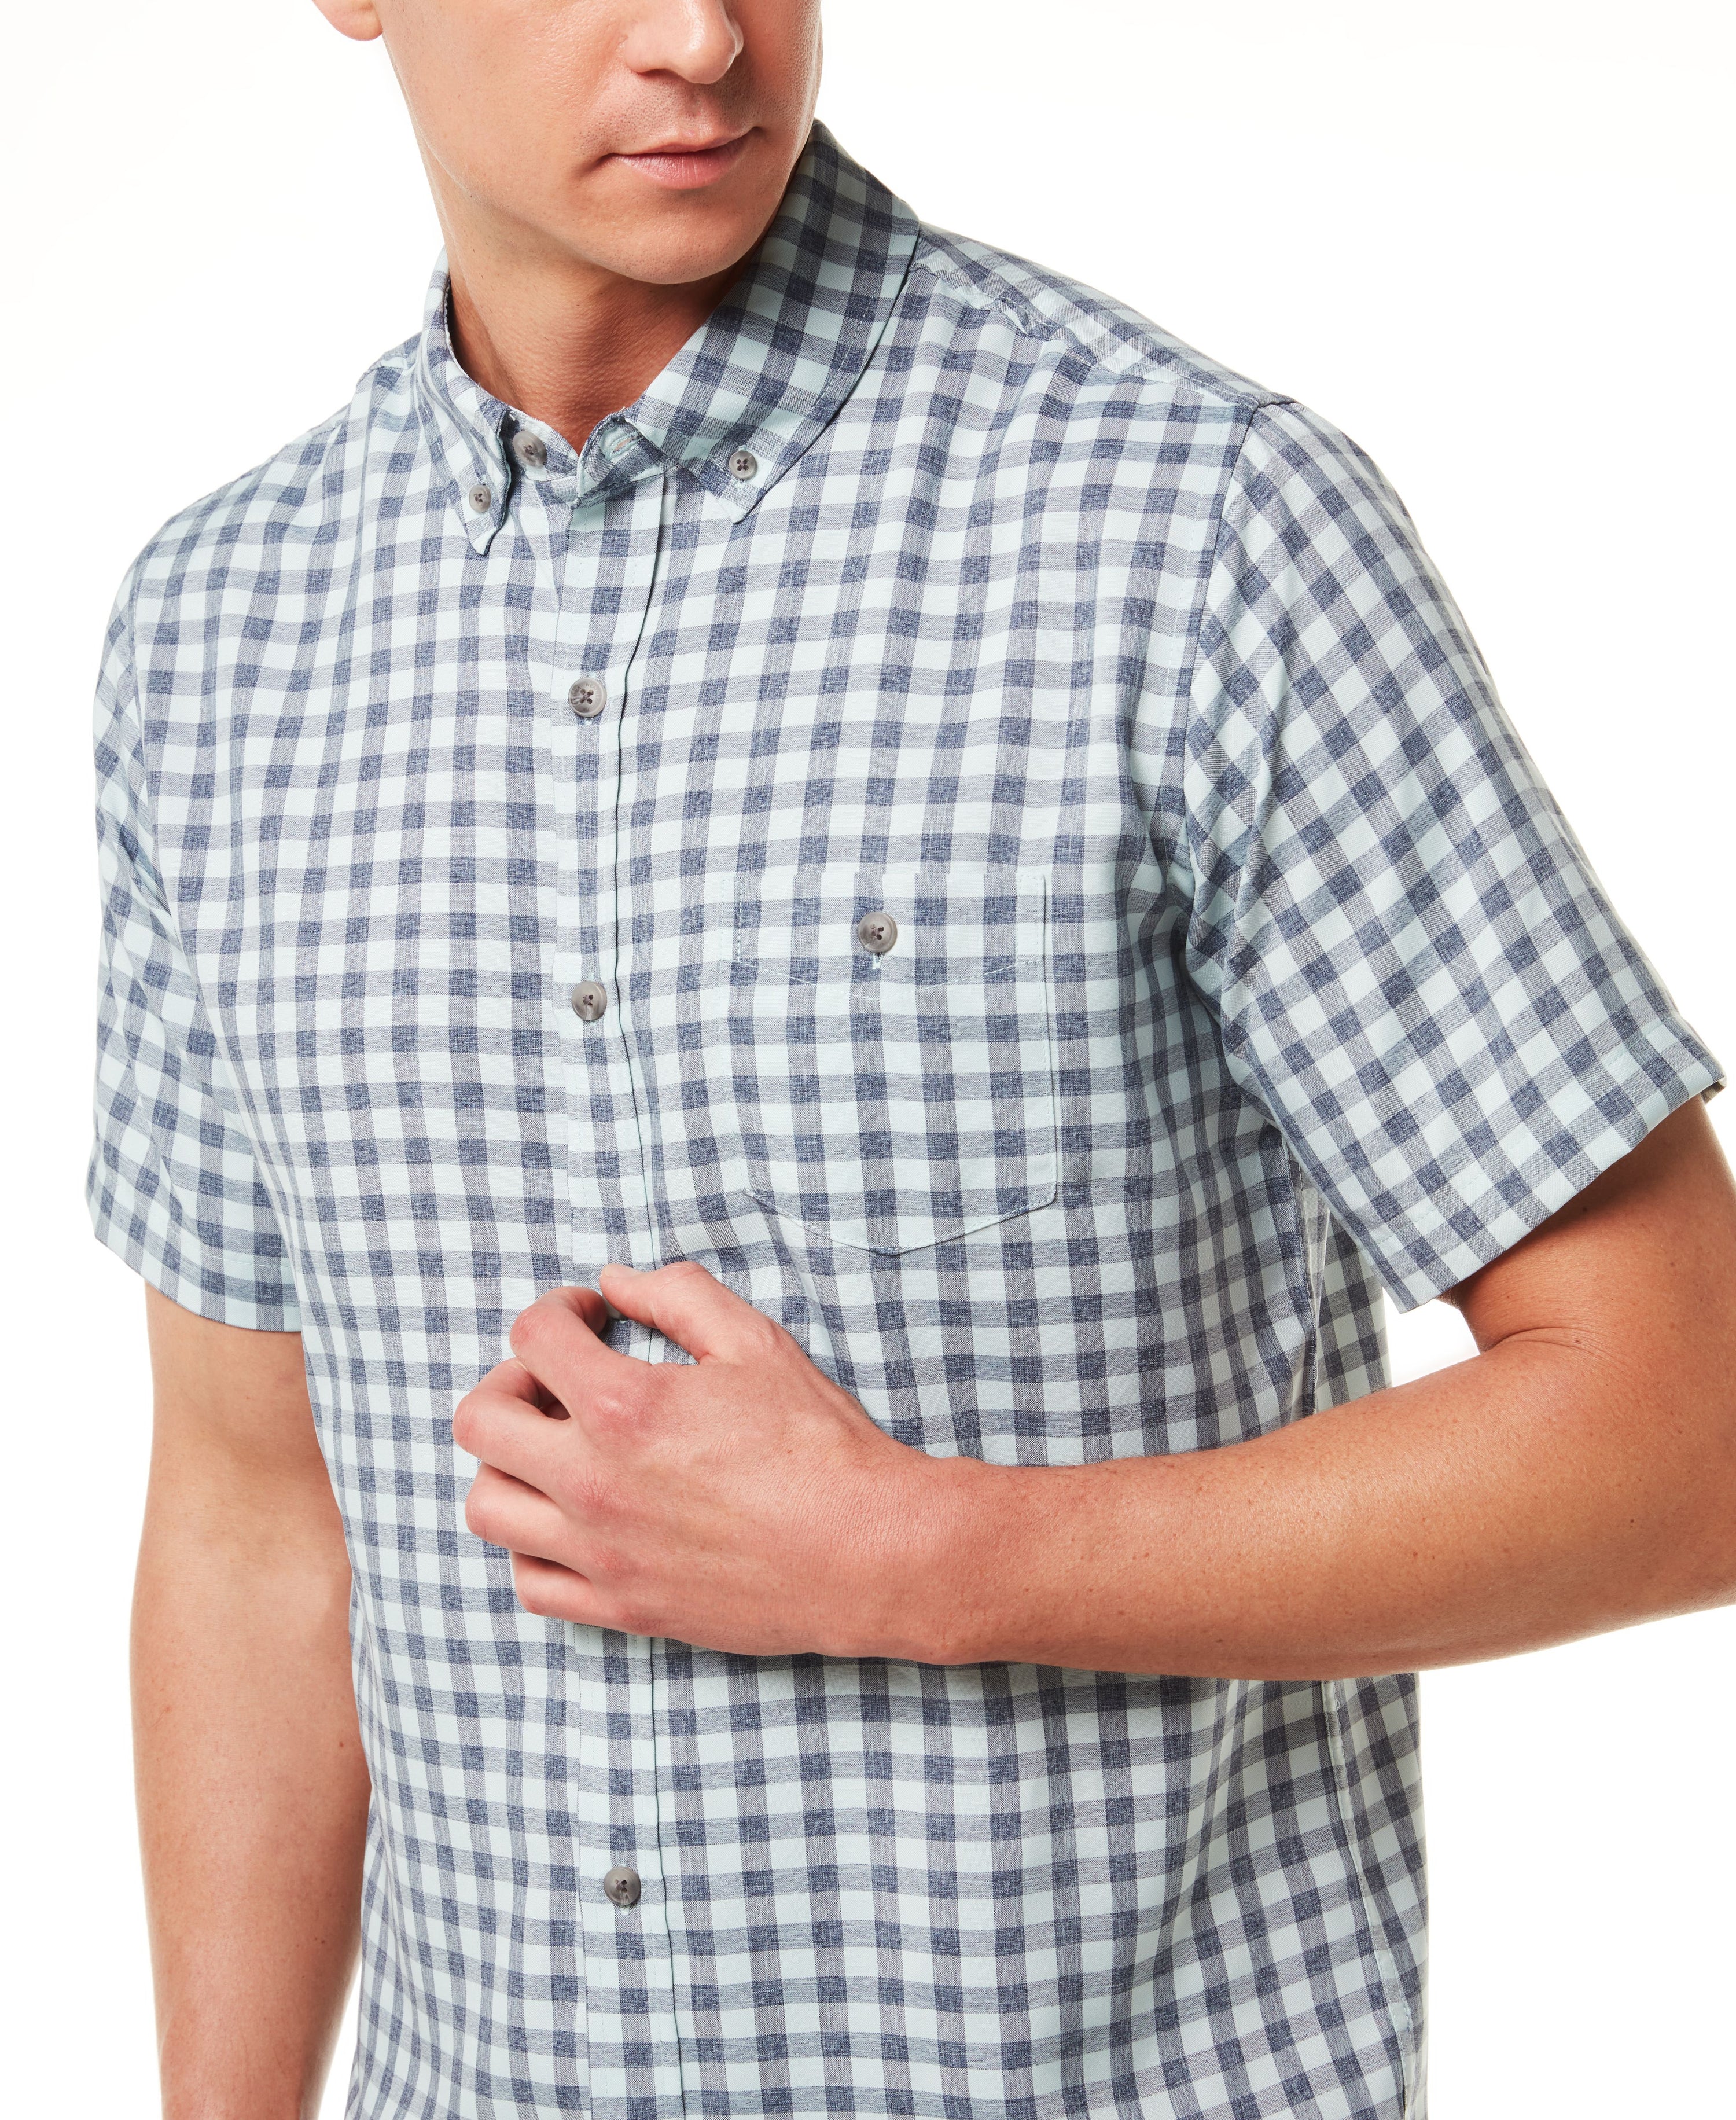 Plaid Performance Shirt in Sterling Blue Check